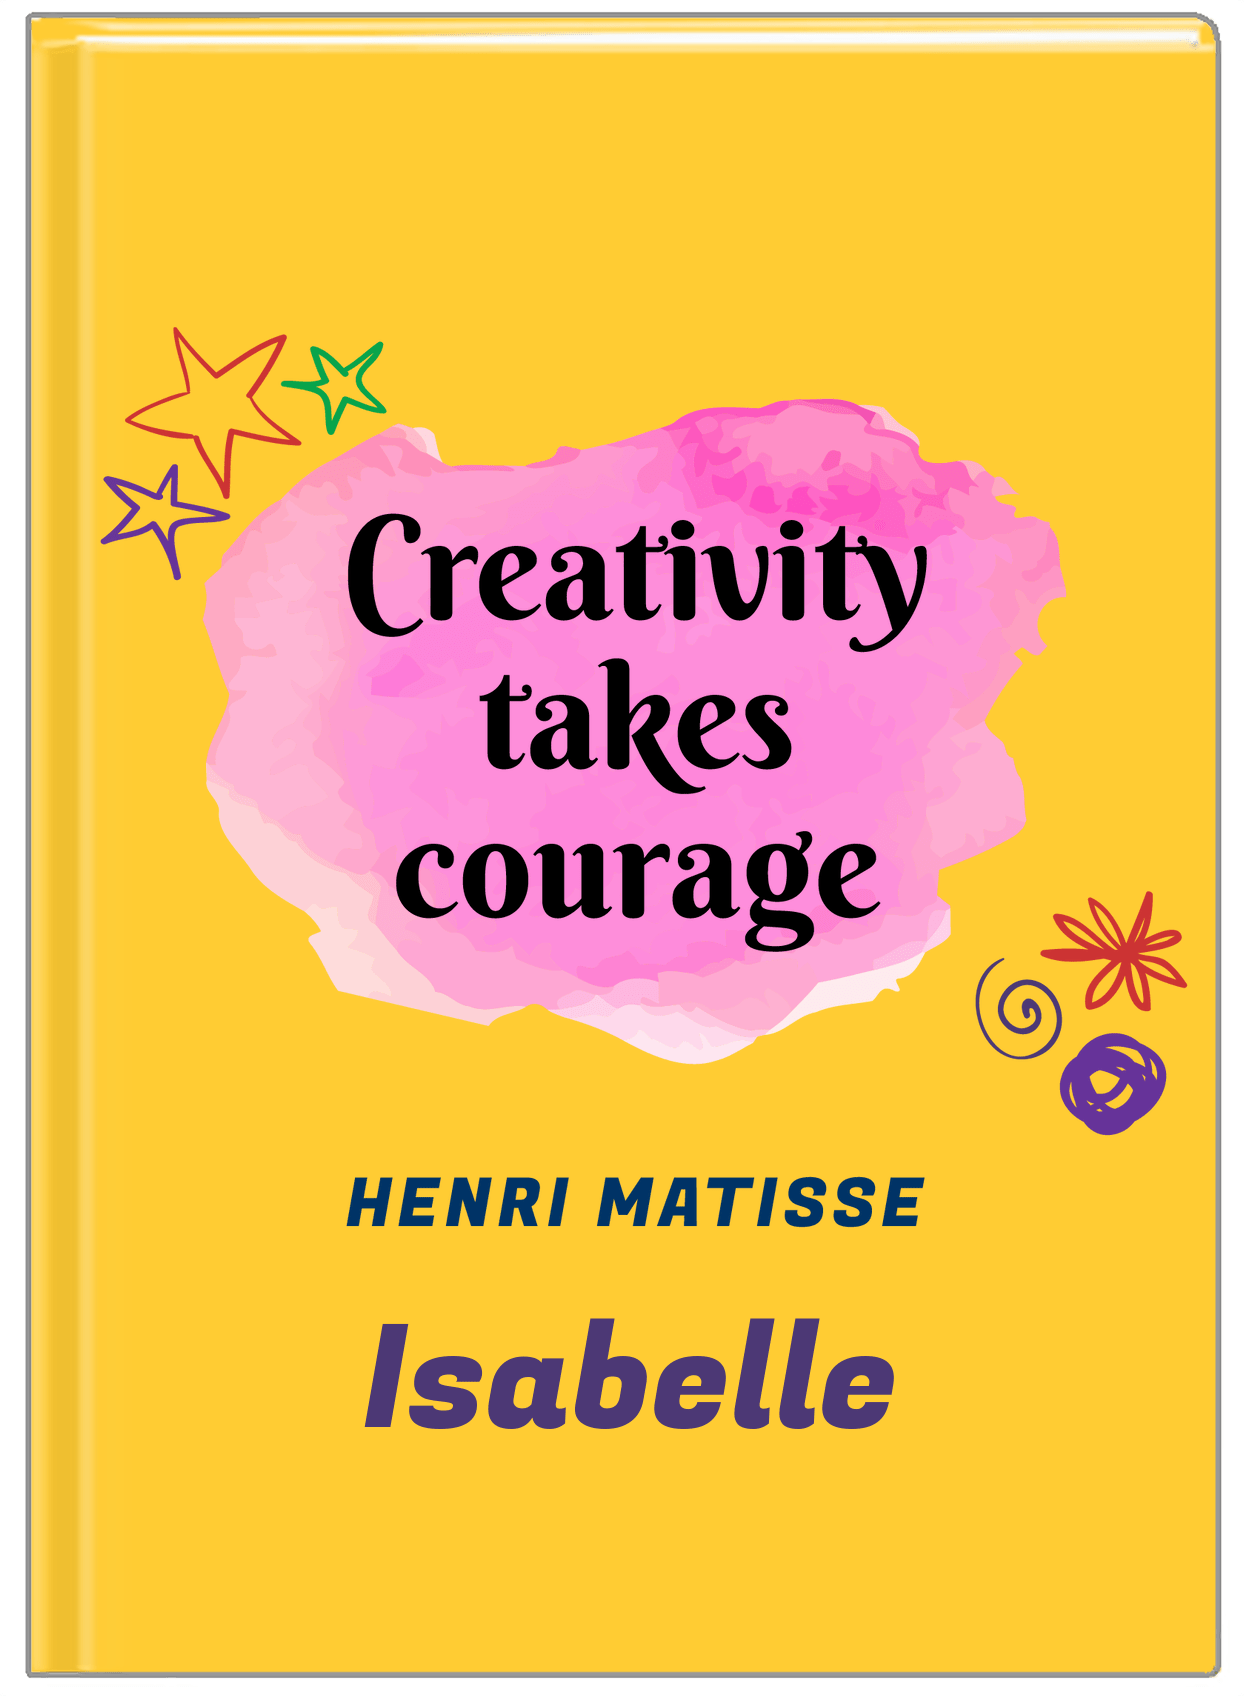 Personalized Famous Quotes Journal - Henri Matisse - Front View